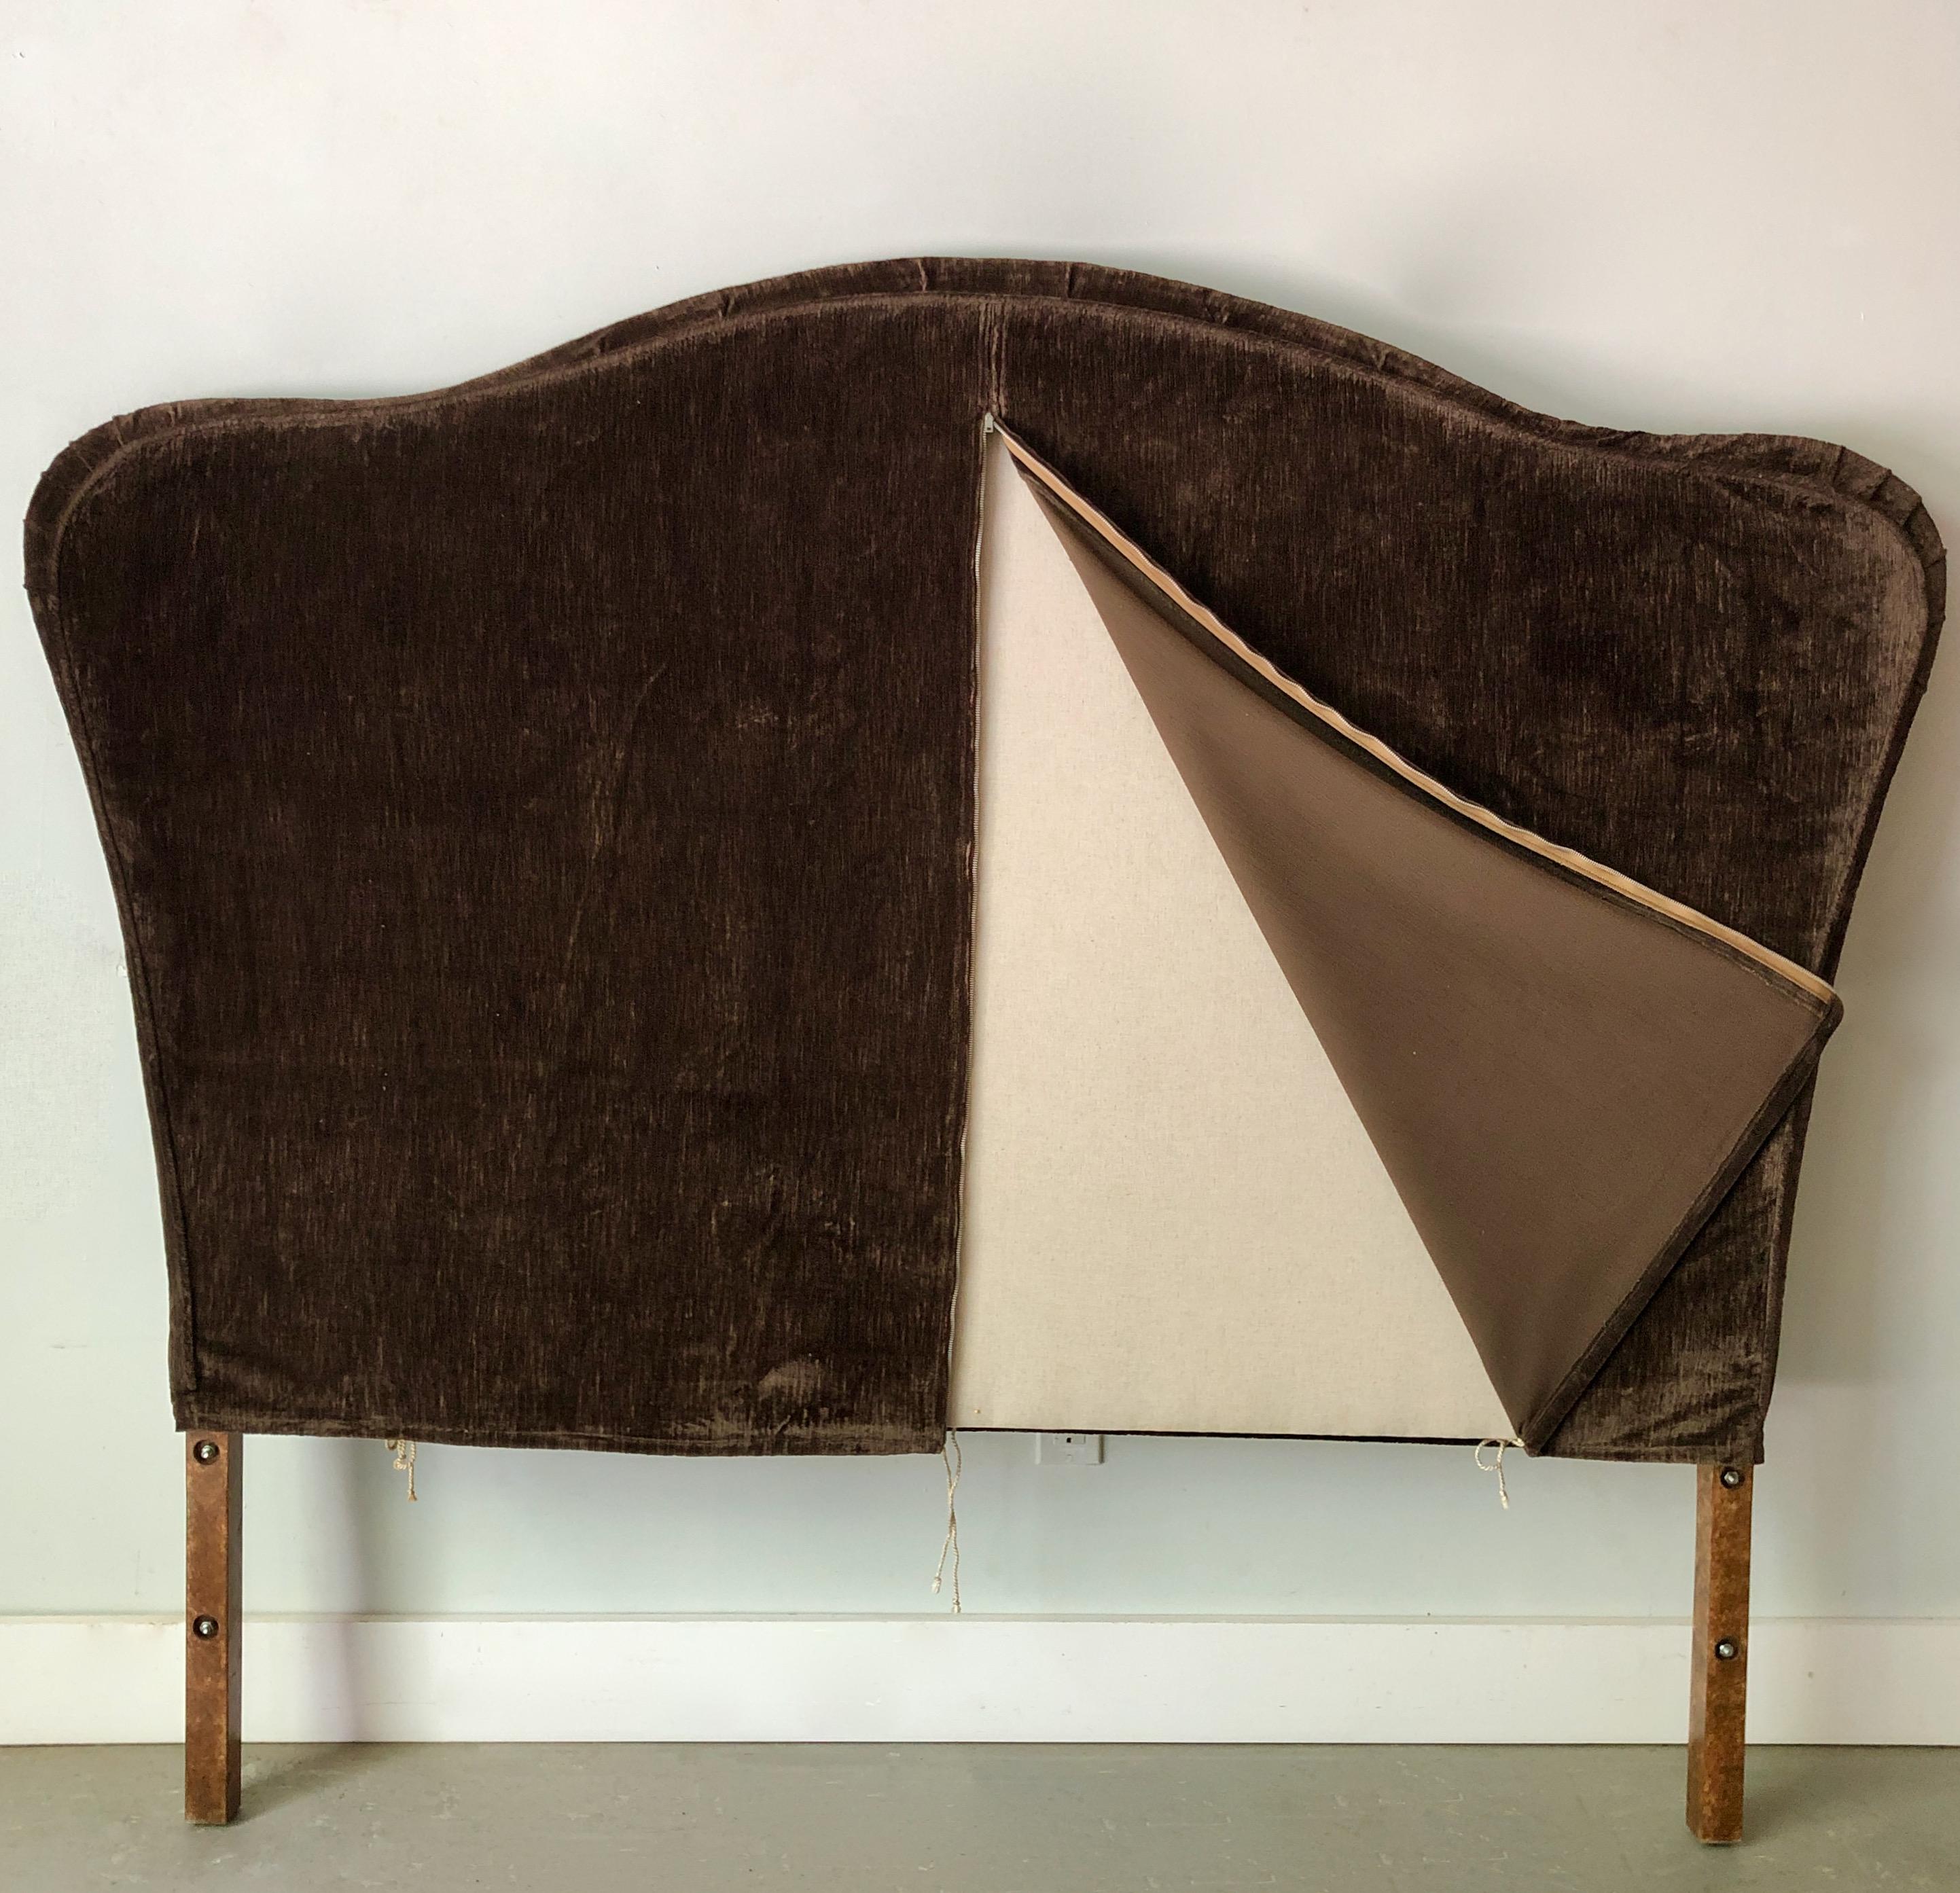 Unknown Vintage Uphostered Headboard with Linen Velvet Slipcover by Anichini